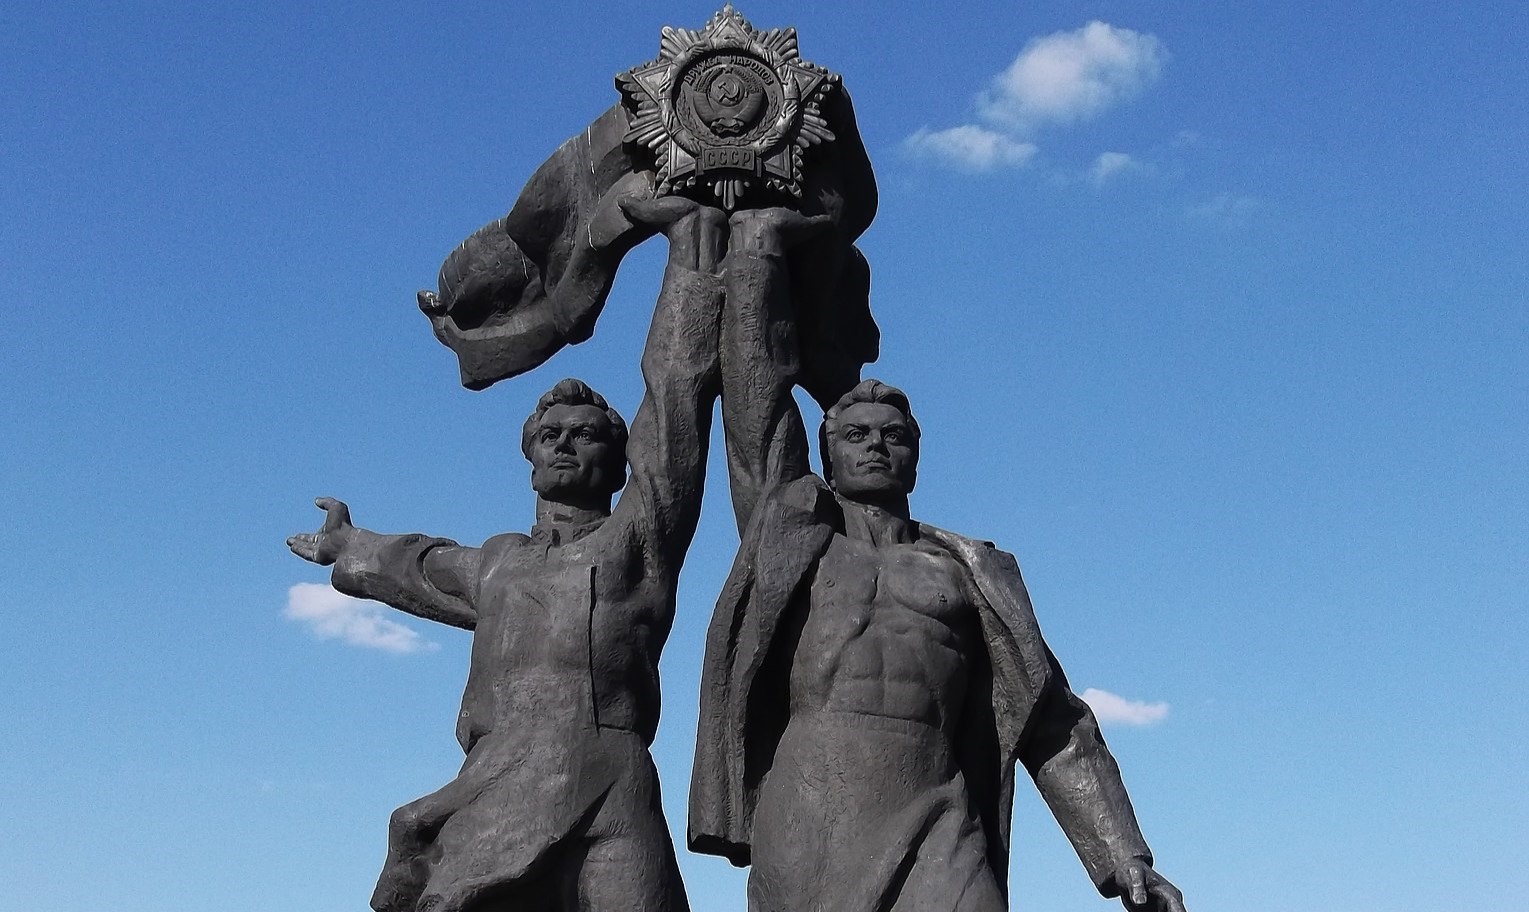 A Soviet era monument erected in 1982 as a symbol of unification between Ukraine and Russia. The monument was removed in April 2022 after Russia's invasion.